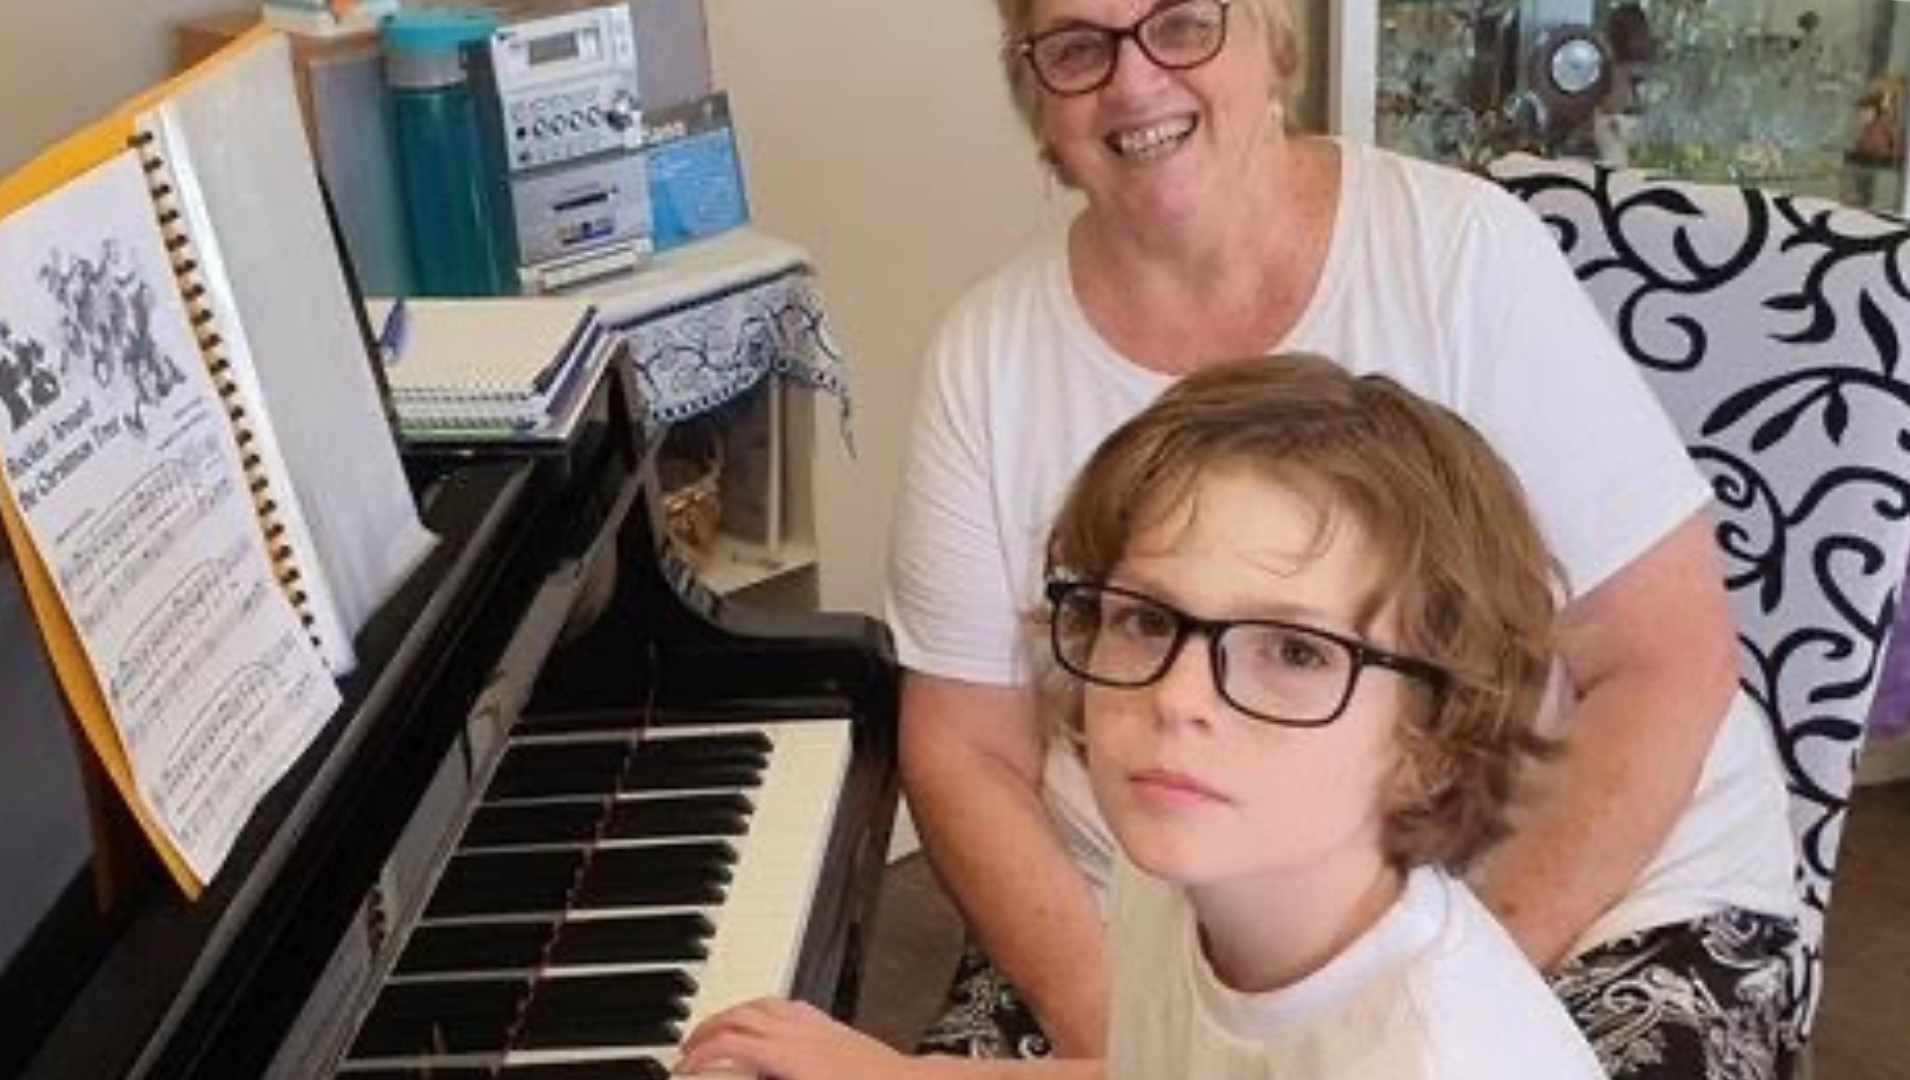 charlie and his music teacher sitting at the electric piano during a lesson in their home